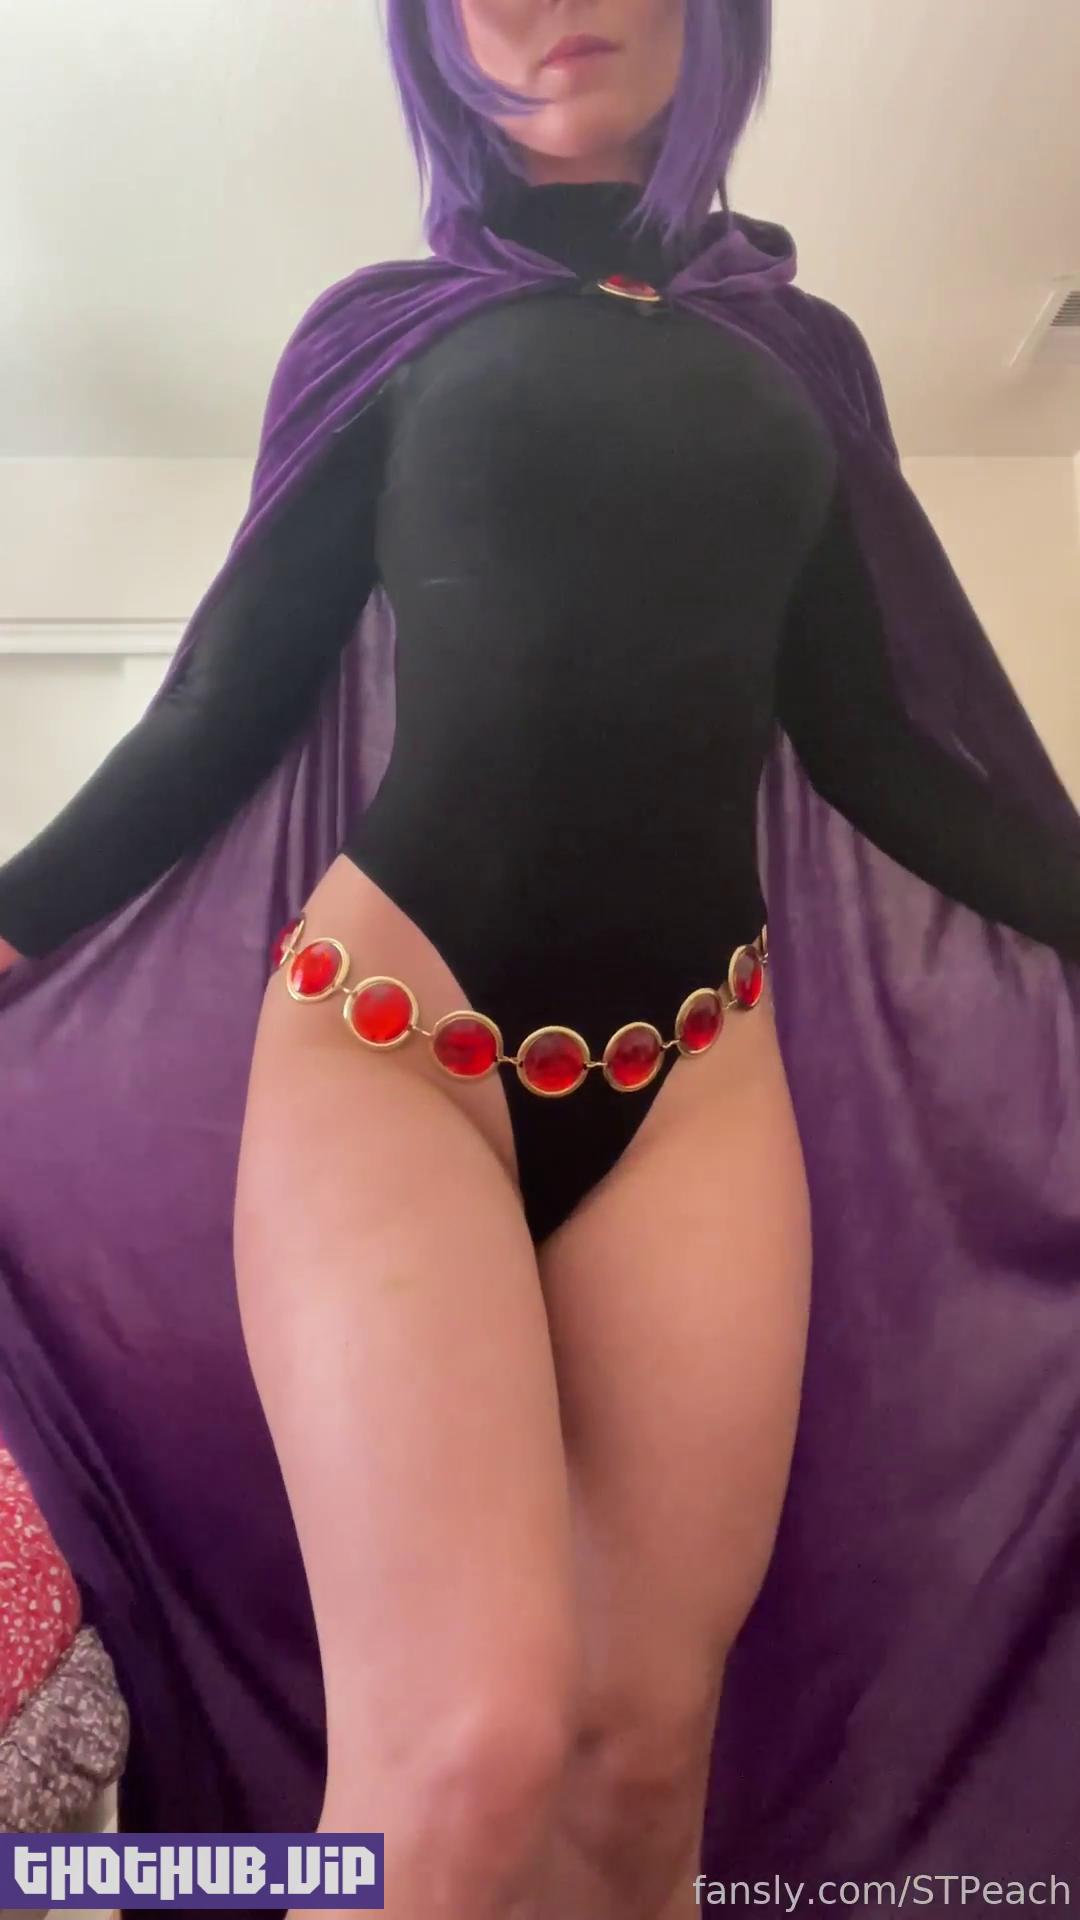 1662957555 409 STPeach Raven Cosplay Fansly Set Leaked